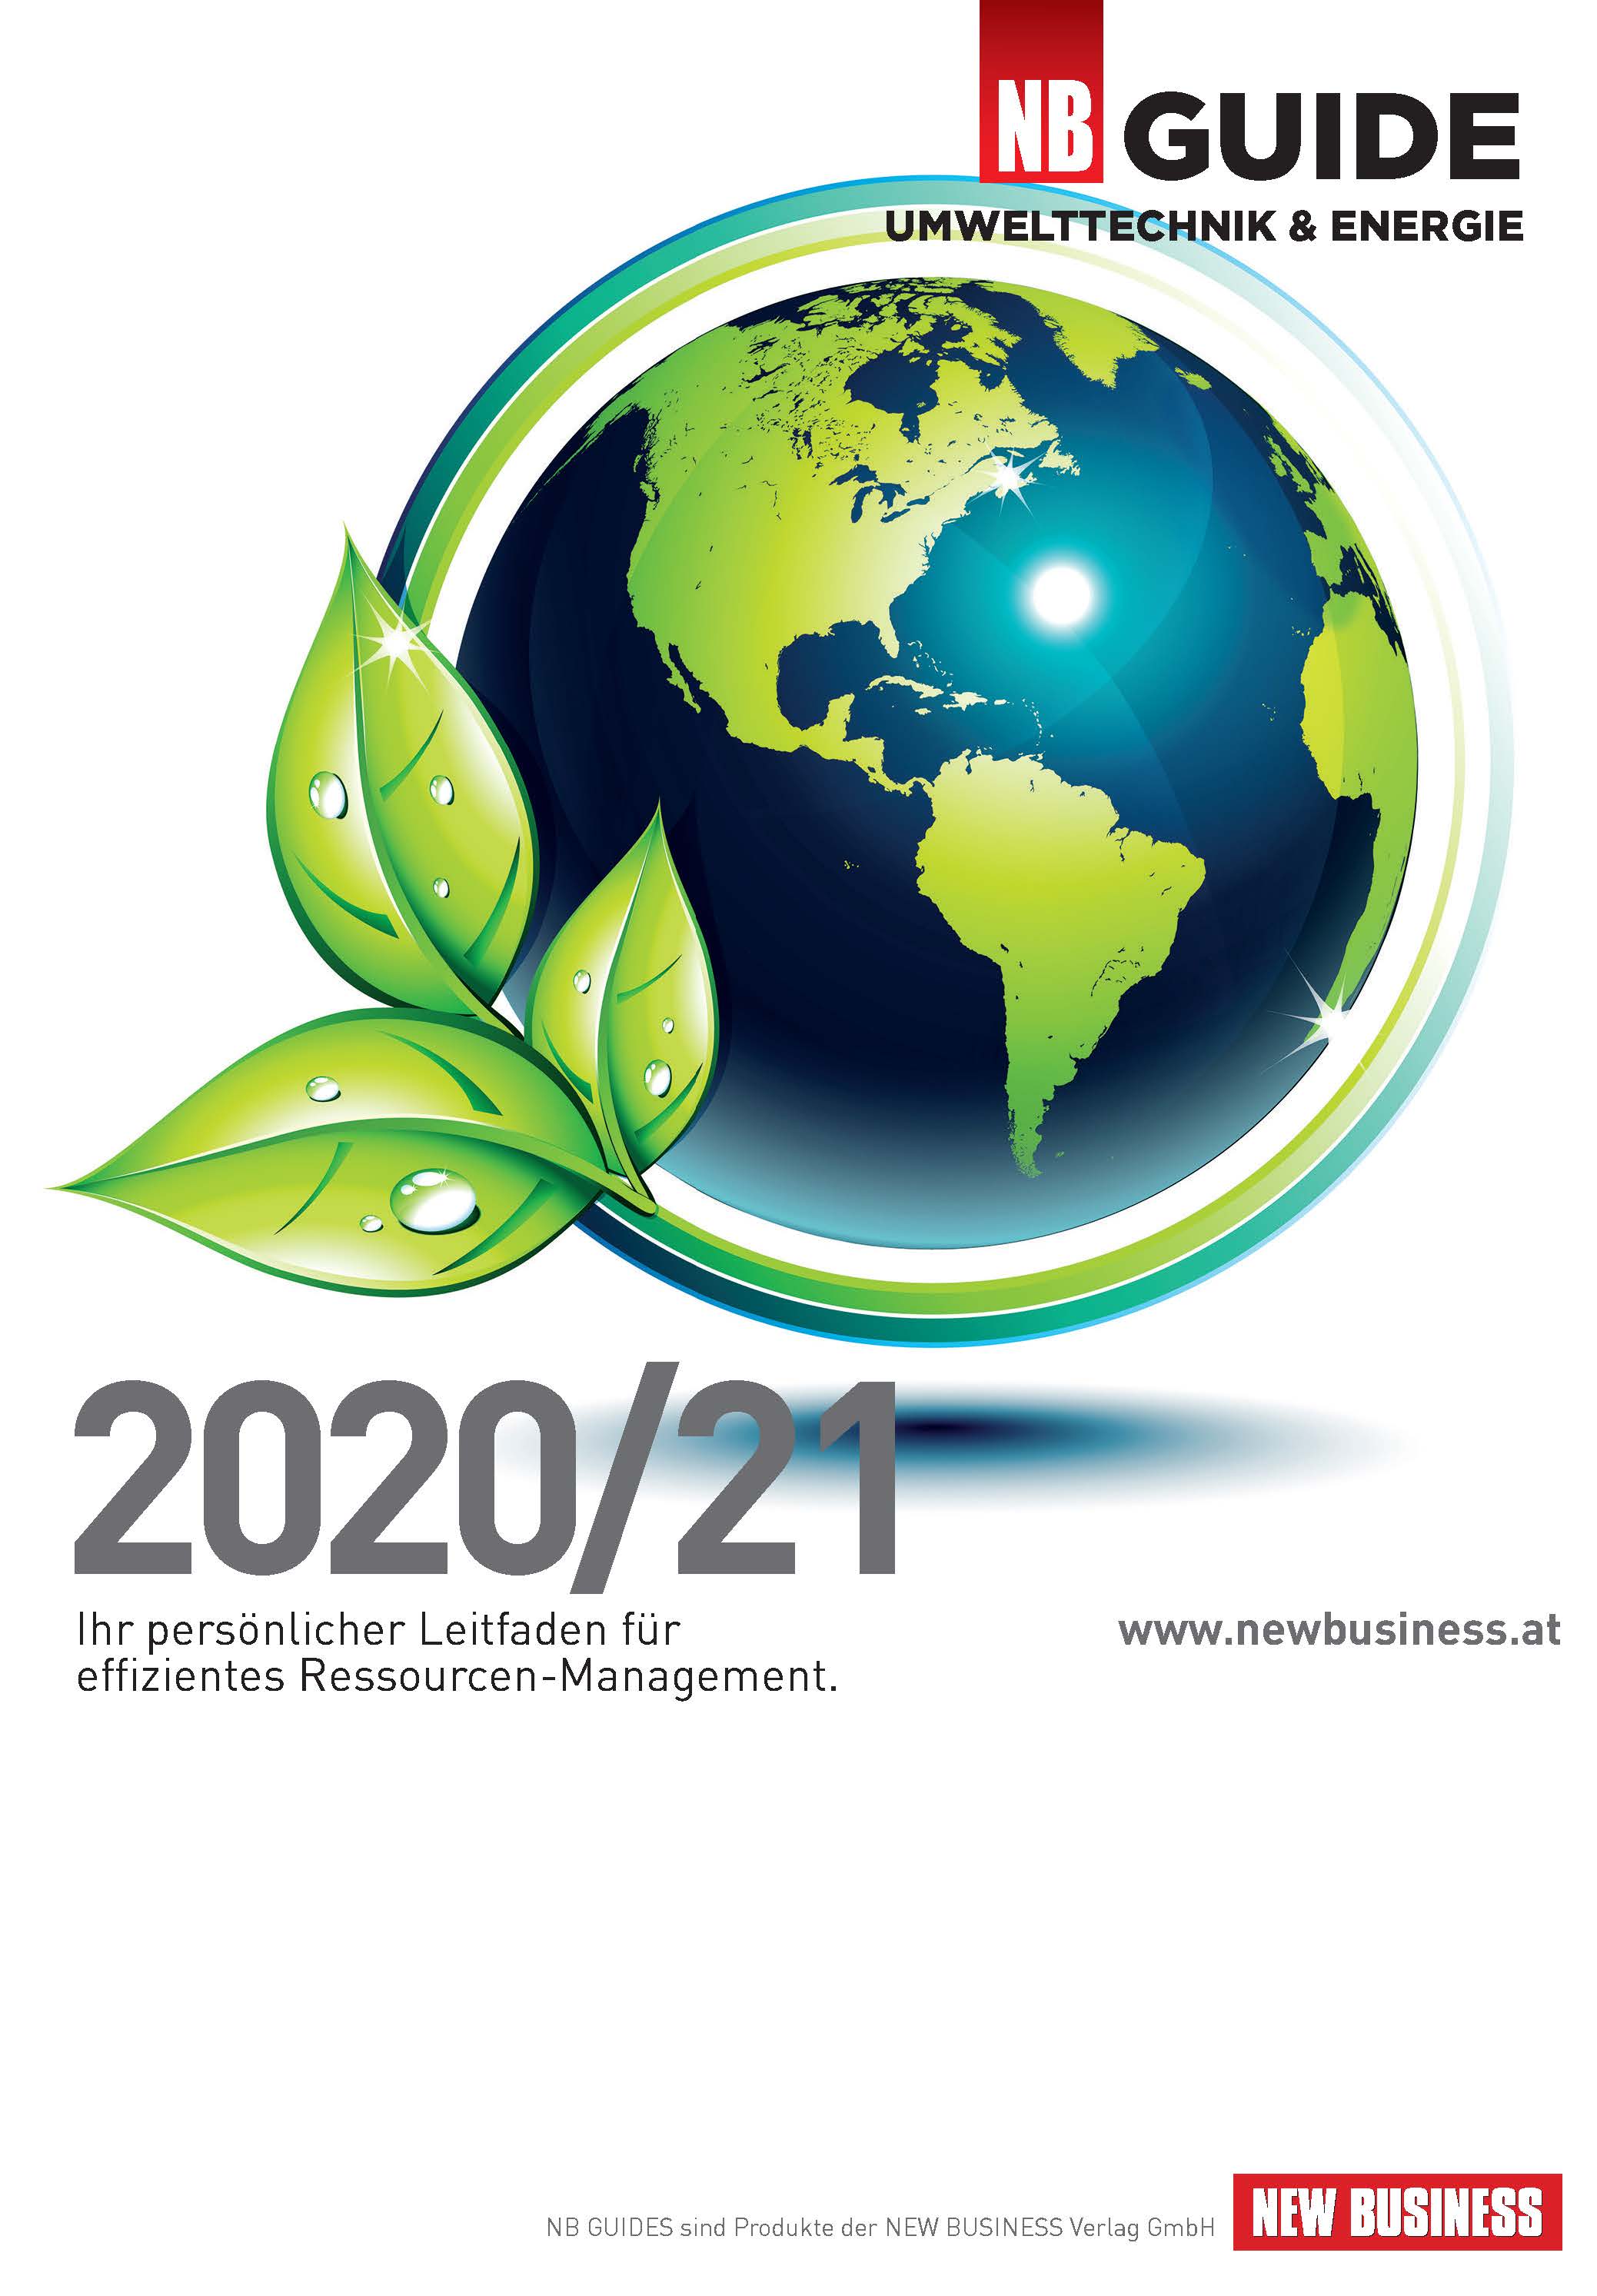 Cover: NEW BUSINESS Guides - UMWELTTECHNIK- & ENERGIE-GUIDE 2020/21